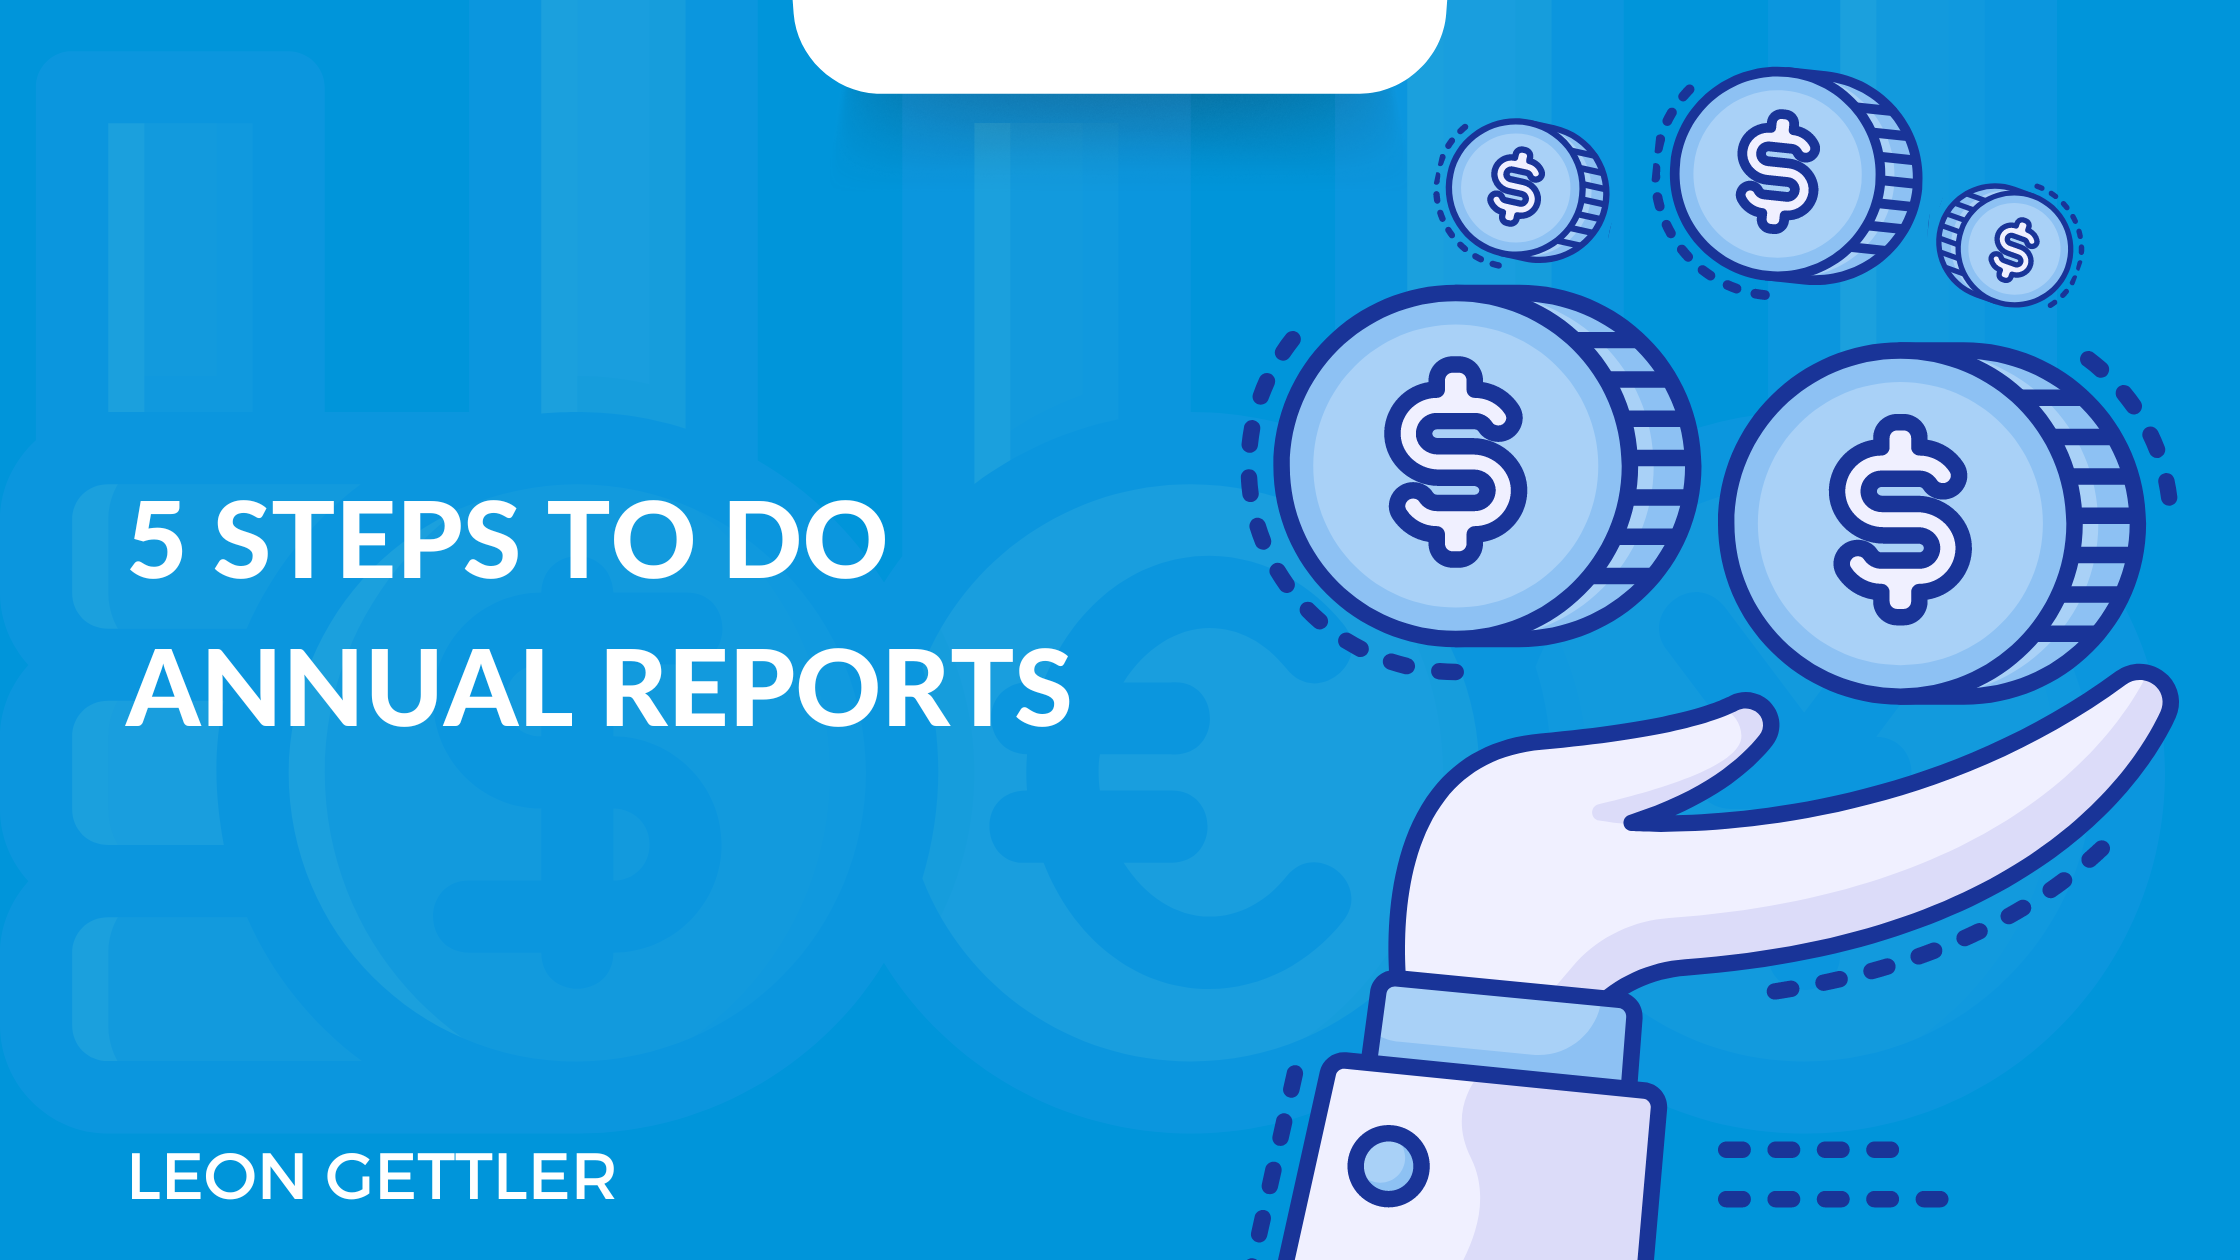 5-steps-to-do-annual-reports-leon-gettler